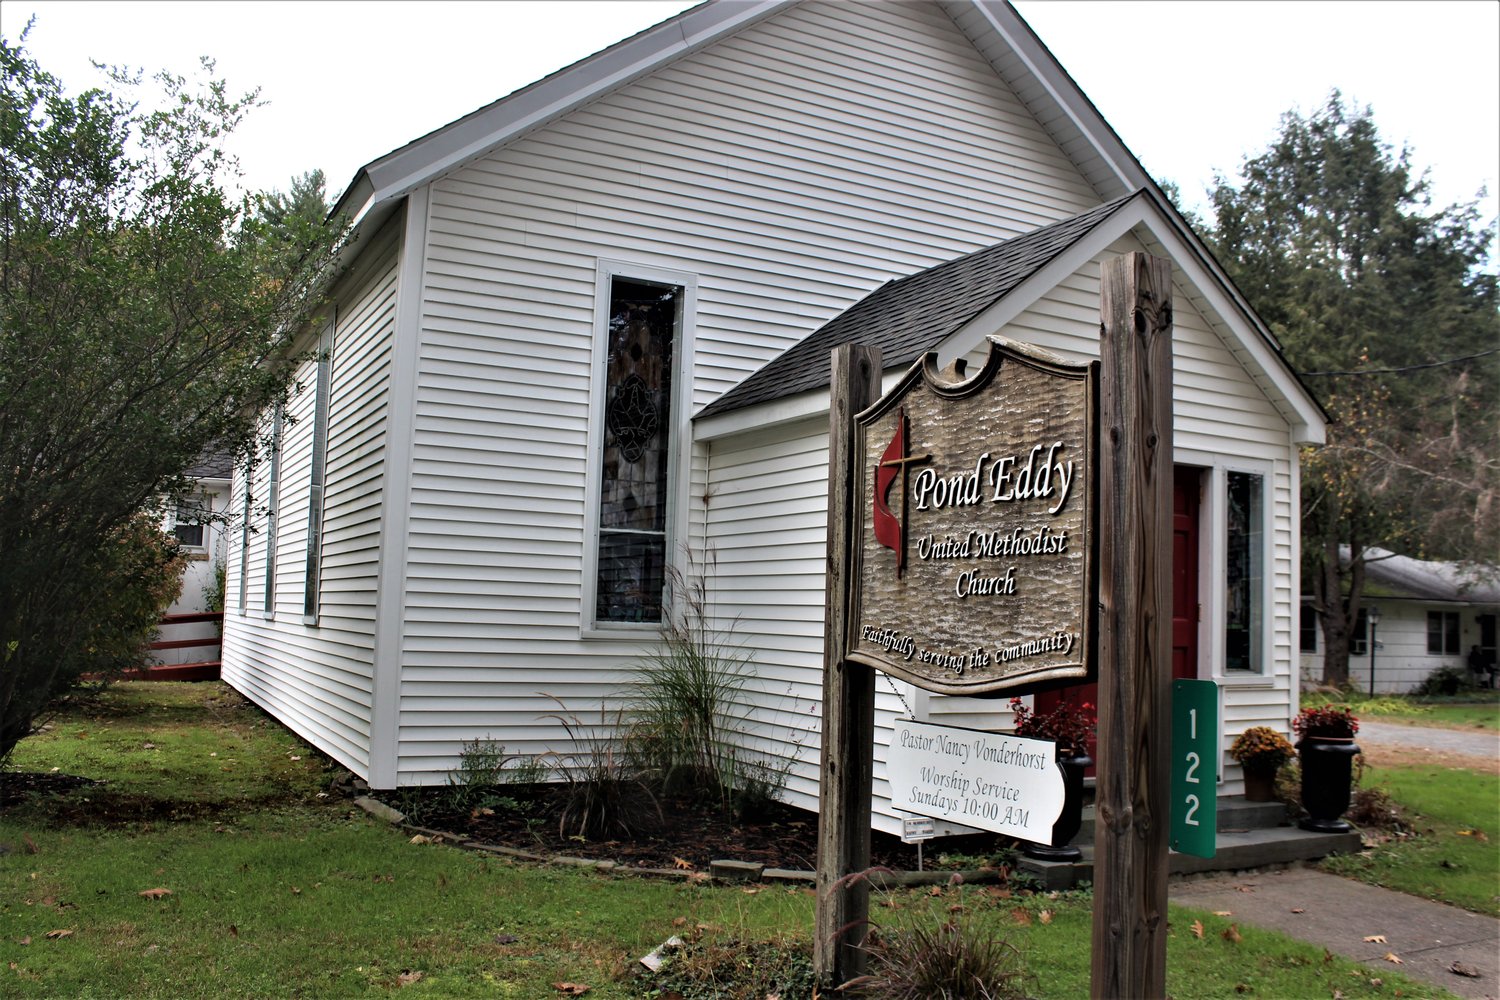 The Pond Eddy United Methodist Church has been the “little church in the vale” for more than 16 decades. Members and guests recently celebrated the church’s 160th anniversary.